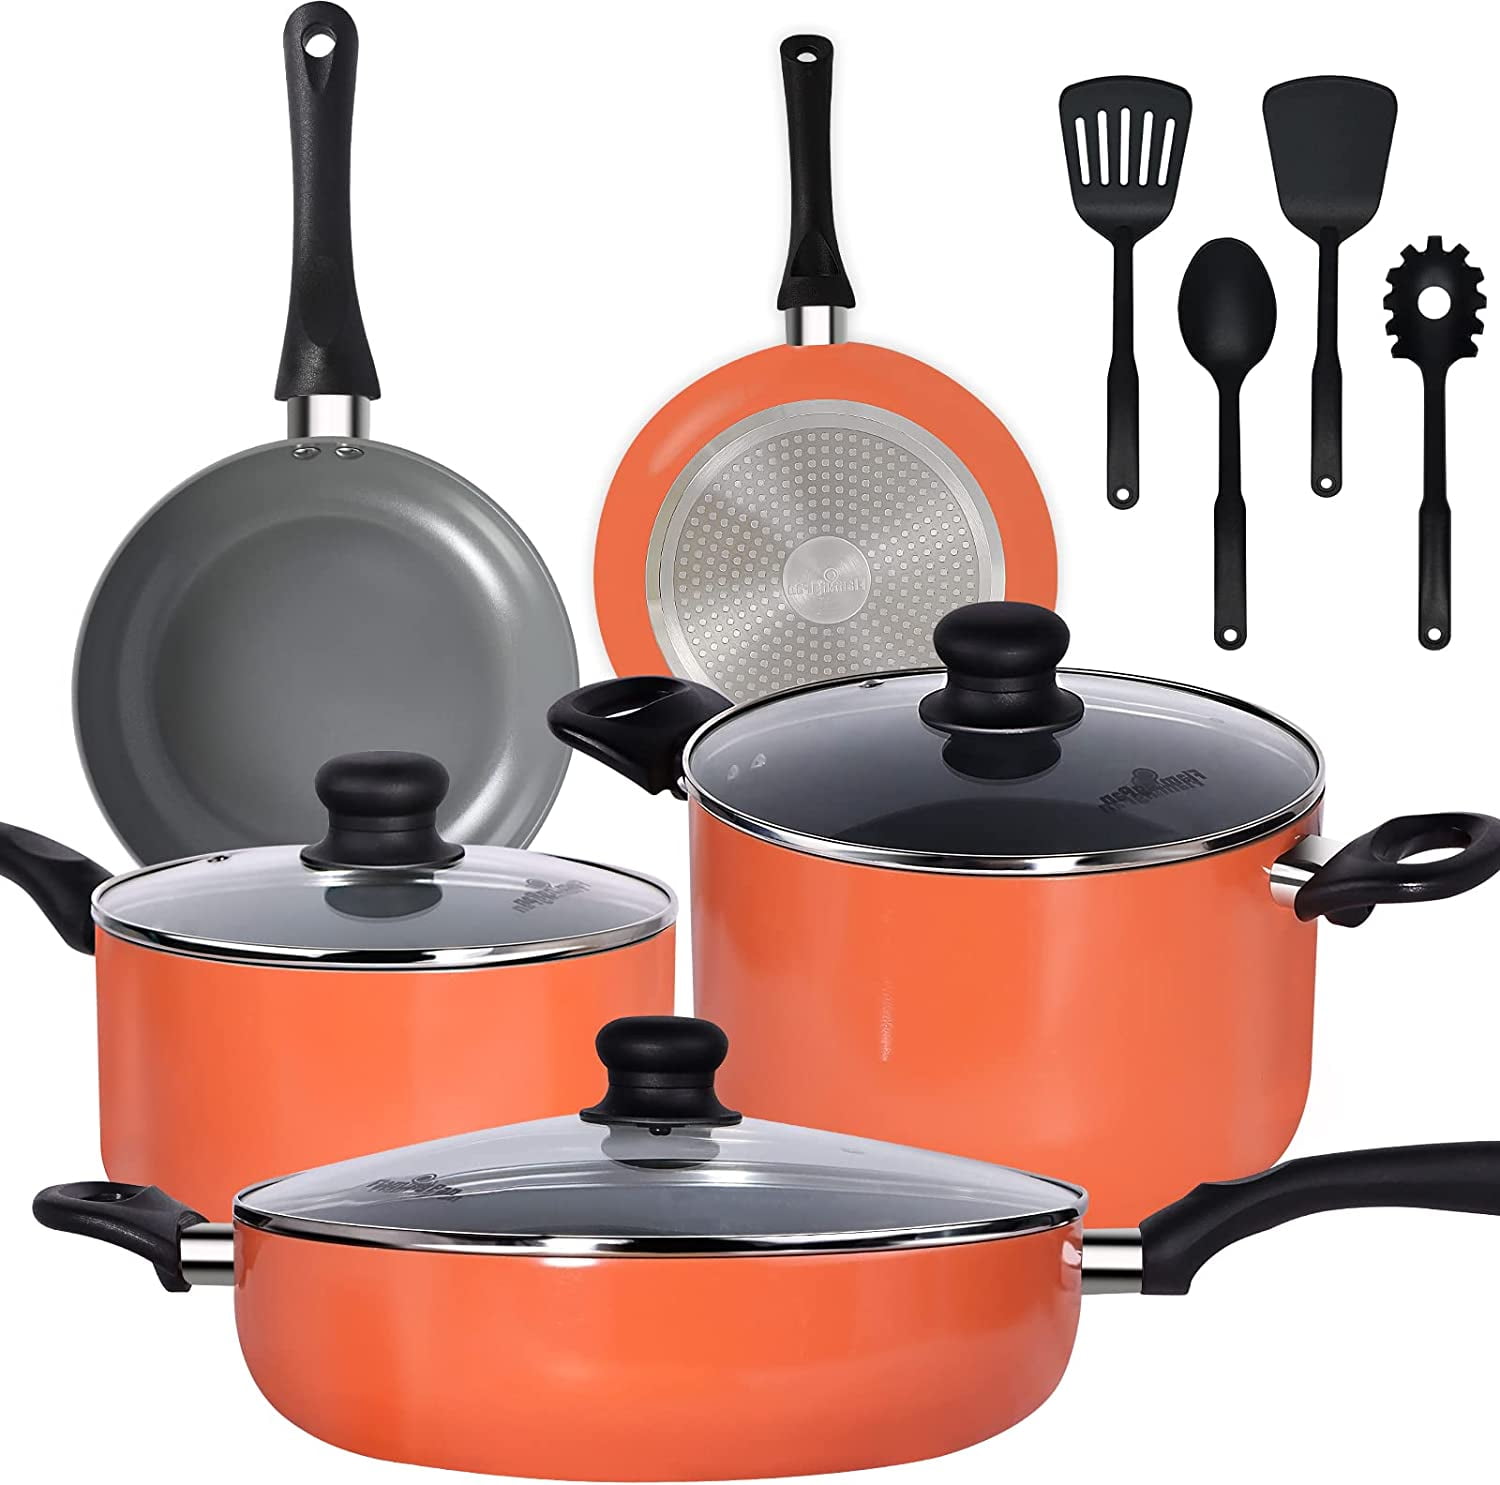 Flamingpan 8-Piece Nonstick Pots and Pans Sets,Kitchen Cookware with  Ceramic Coating,Dishwasher Safe, Induction Frying Pan with Lid with